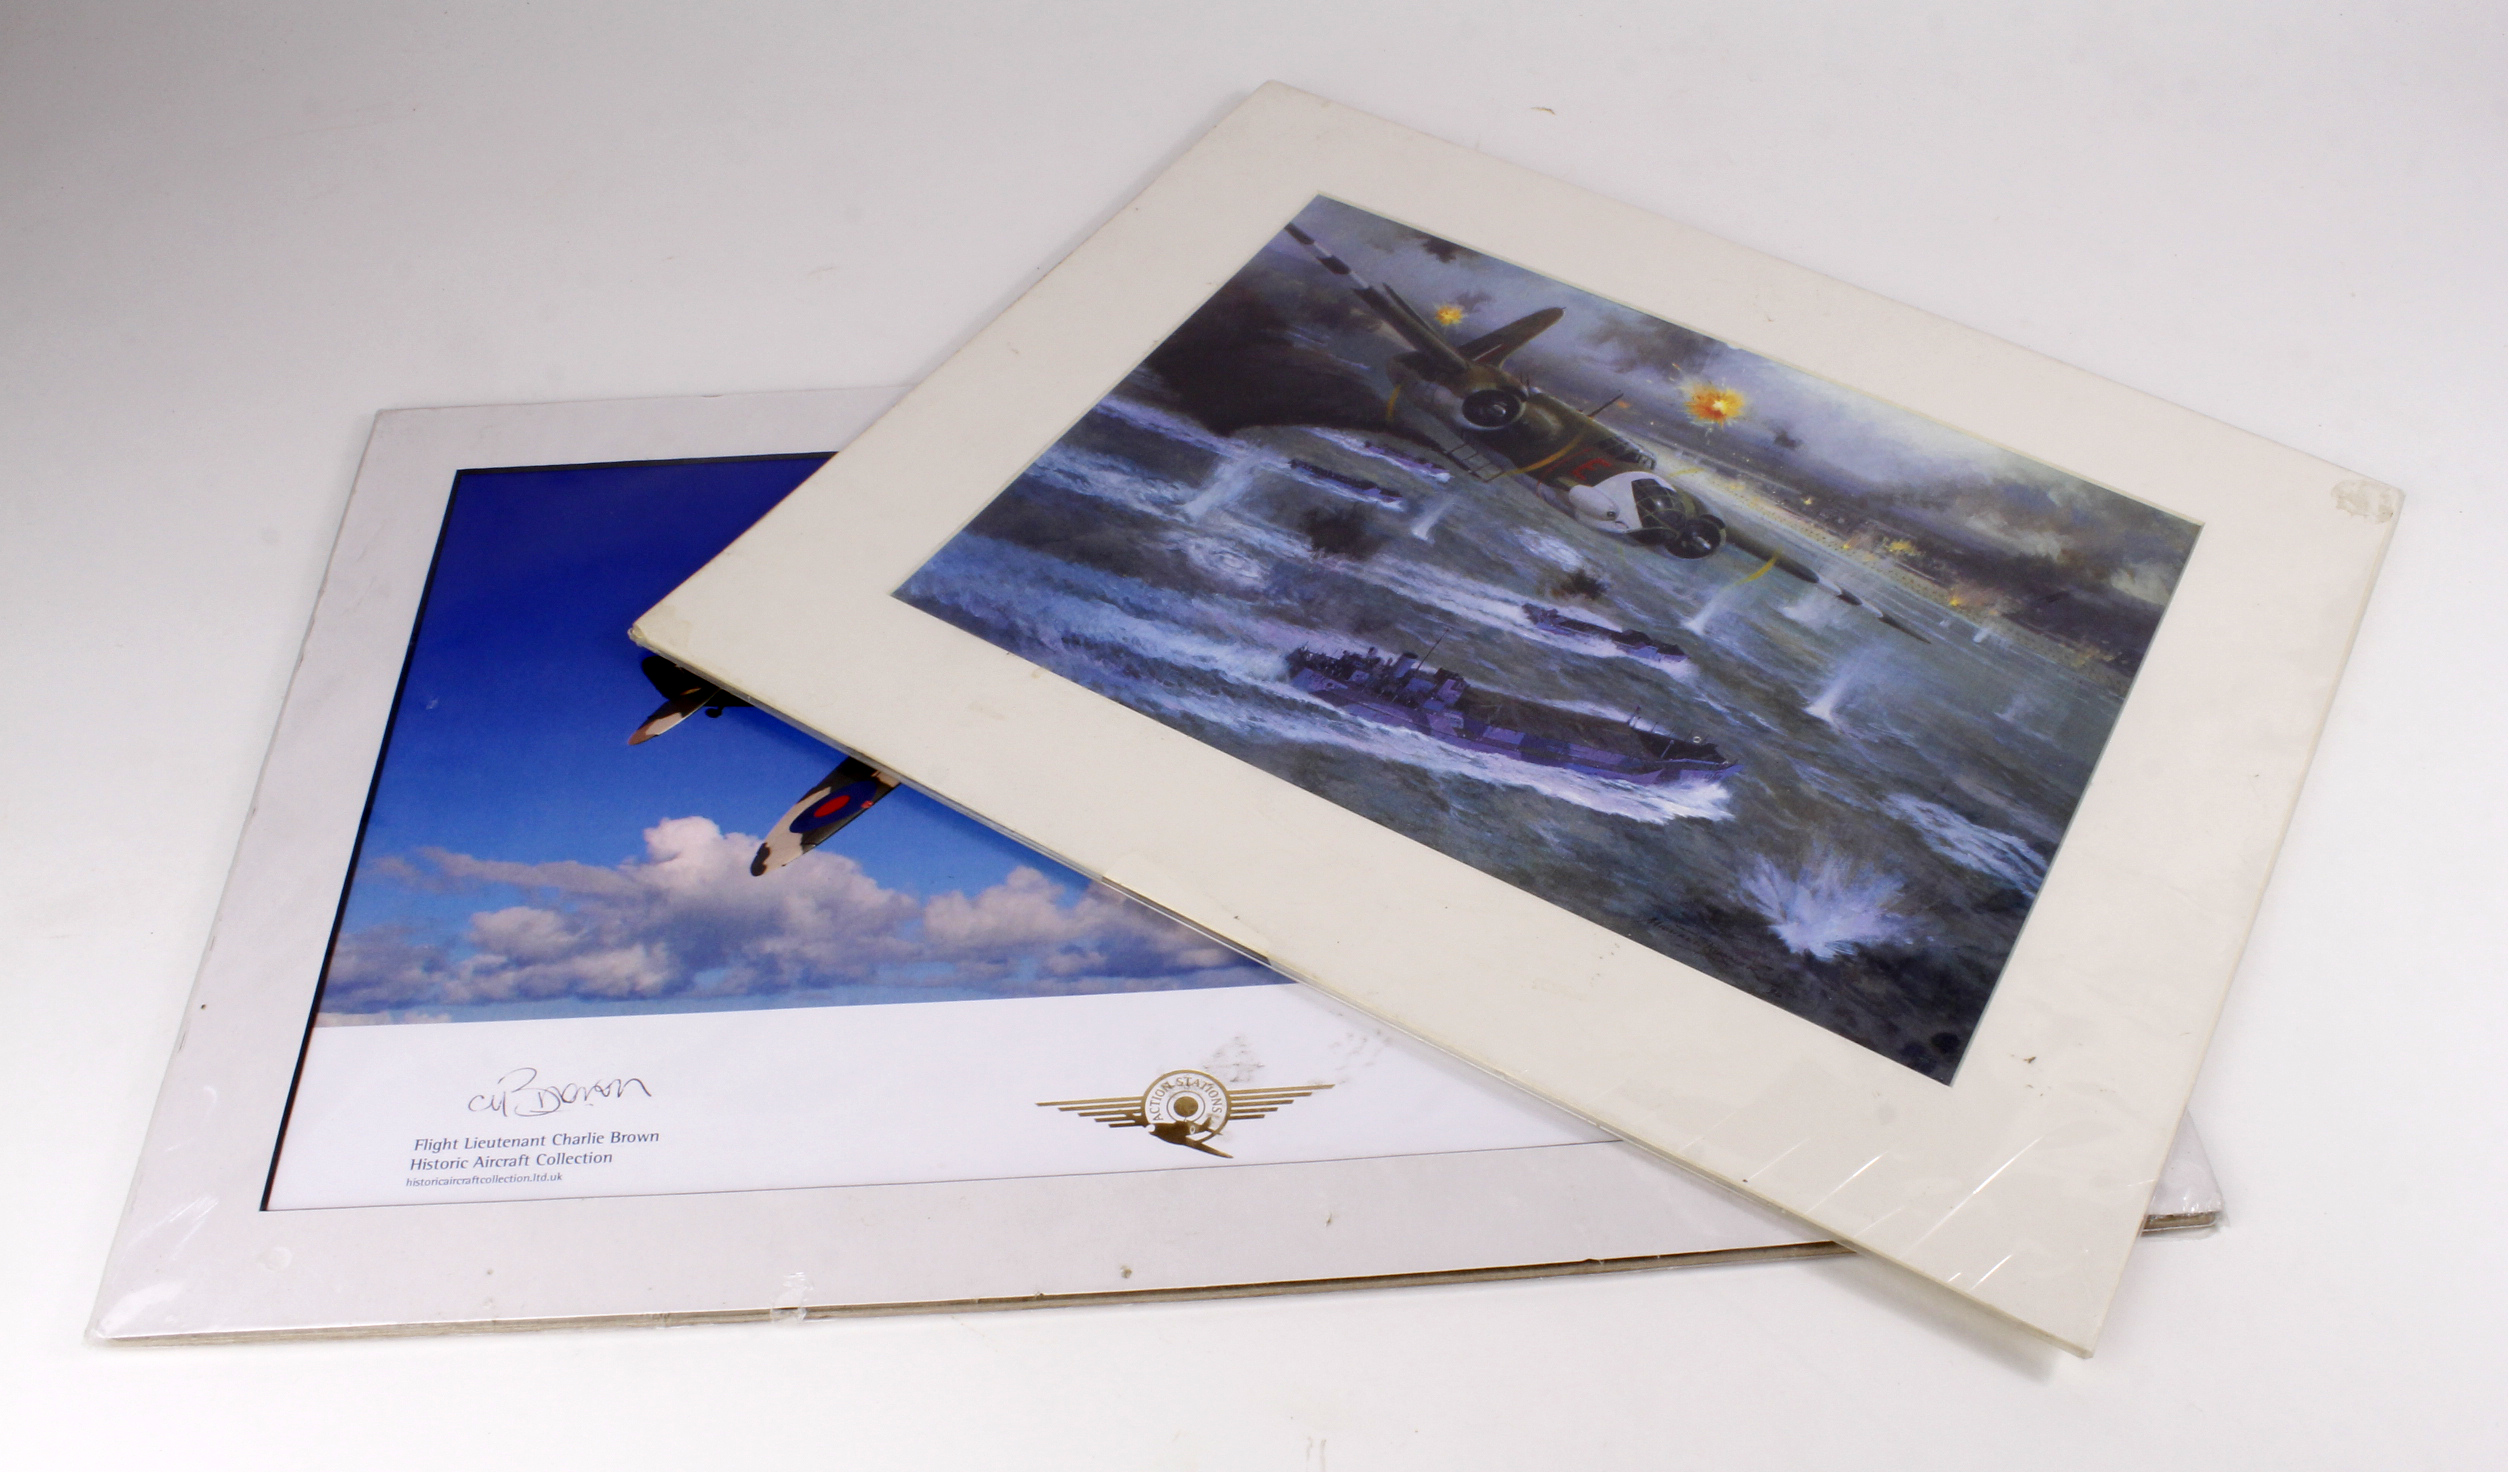 Coloured prints Douglas Boston aircraft full details on reverse also Spitfire in Flight signed by